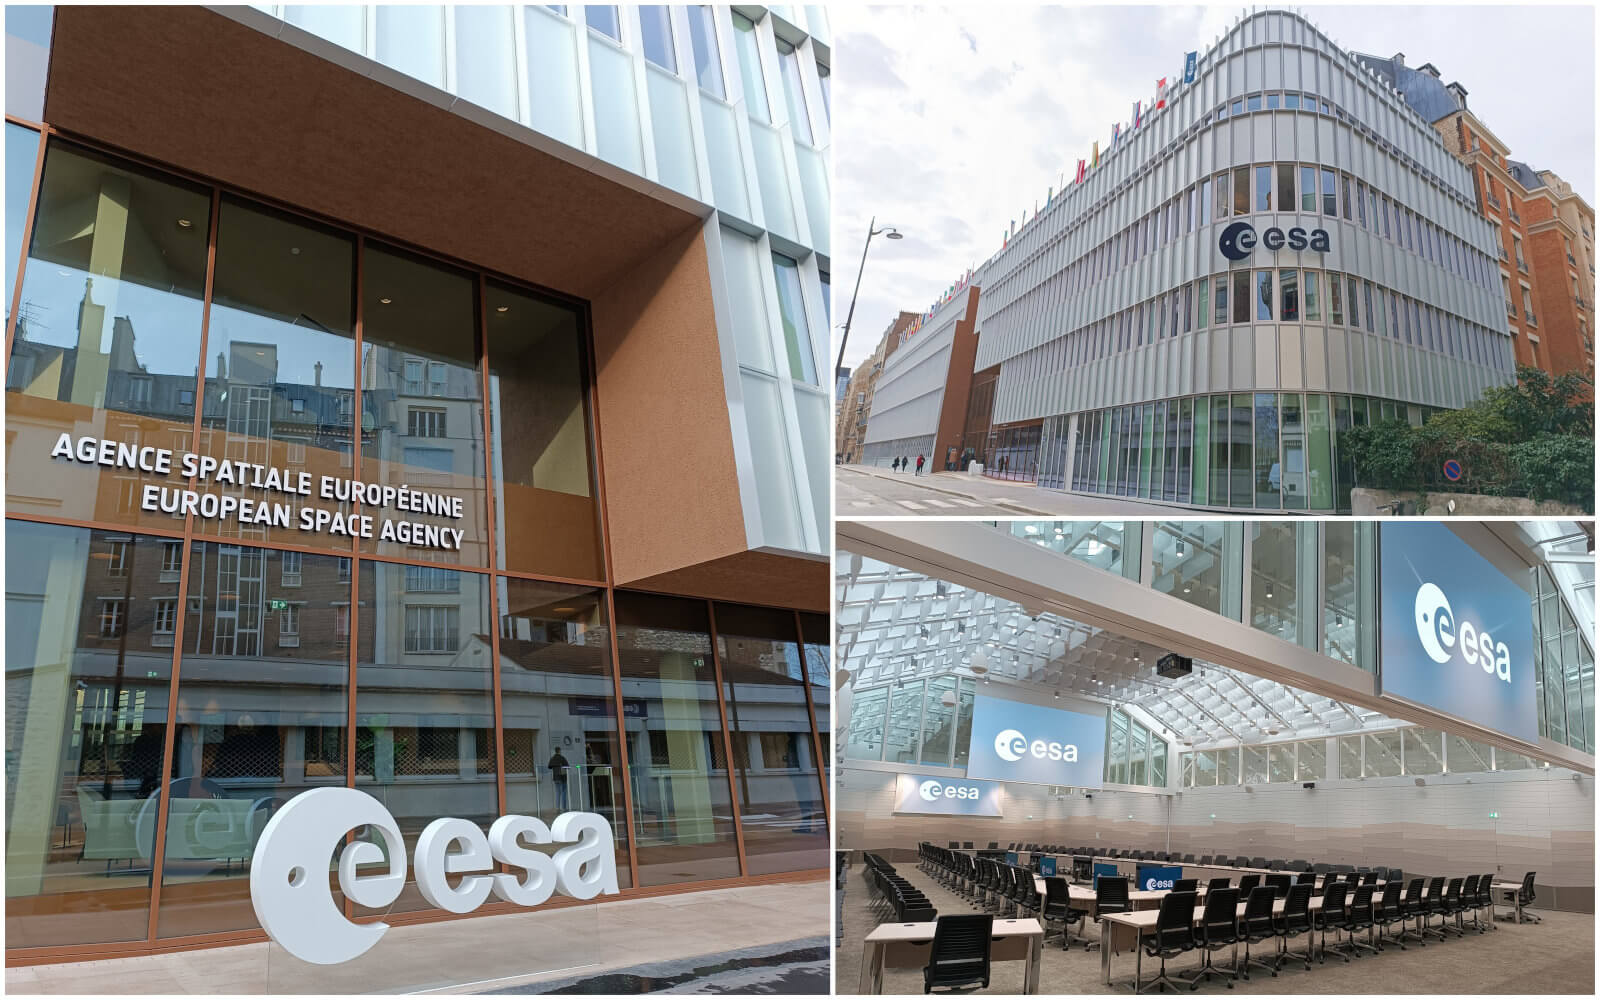 Reopening of the European Space Agency's historic headquarters